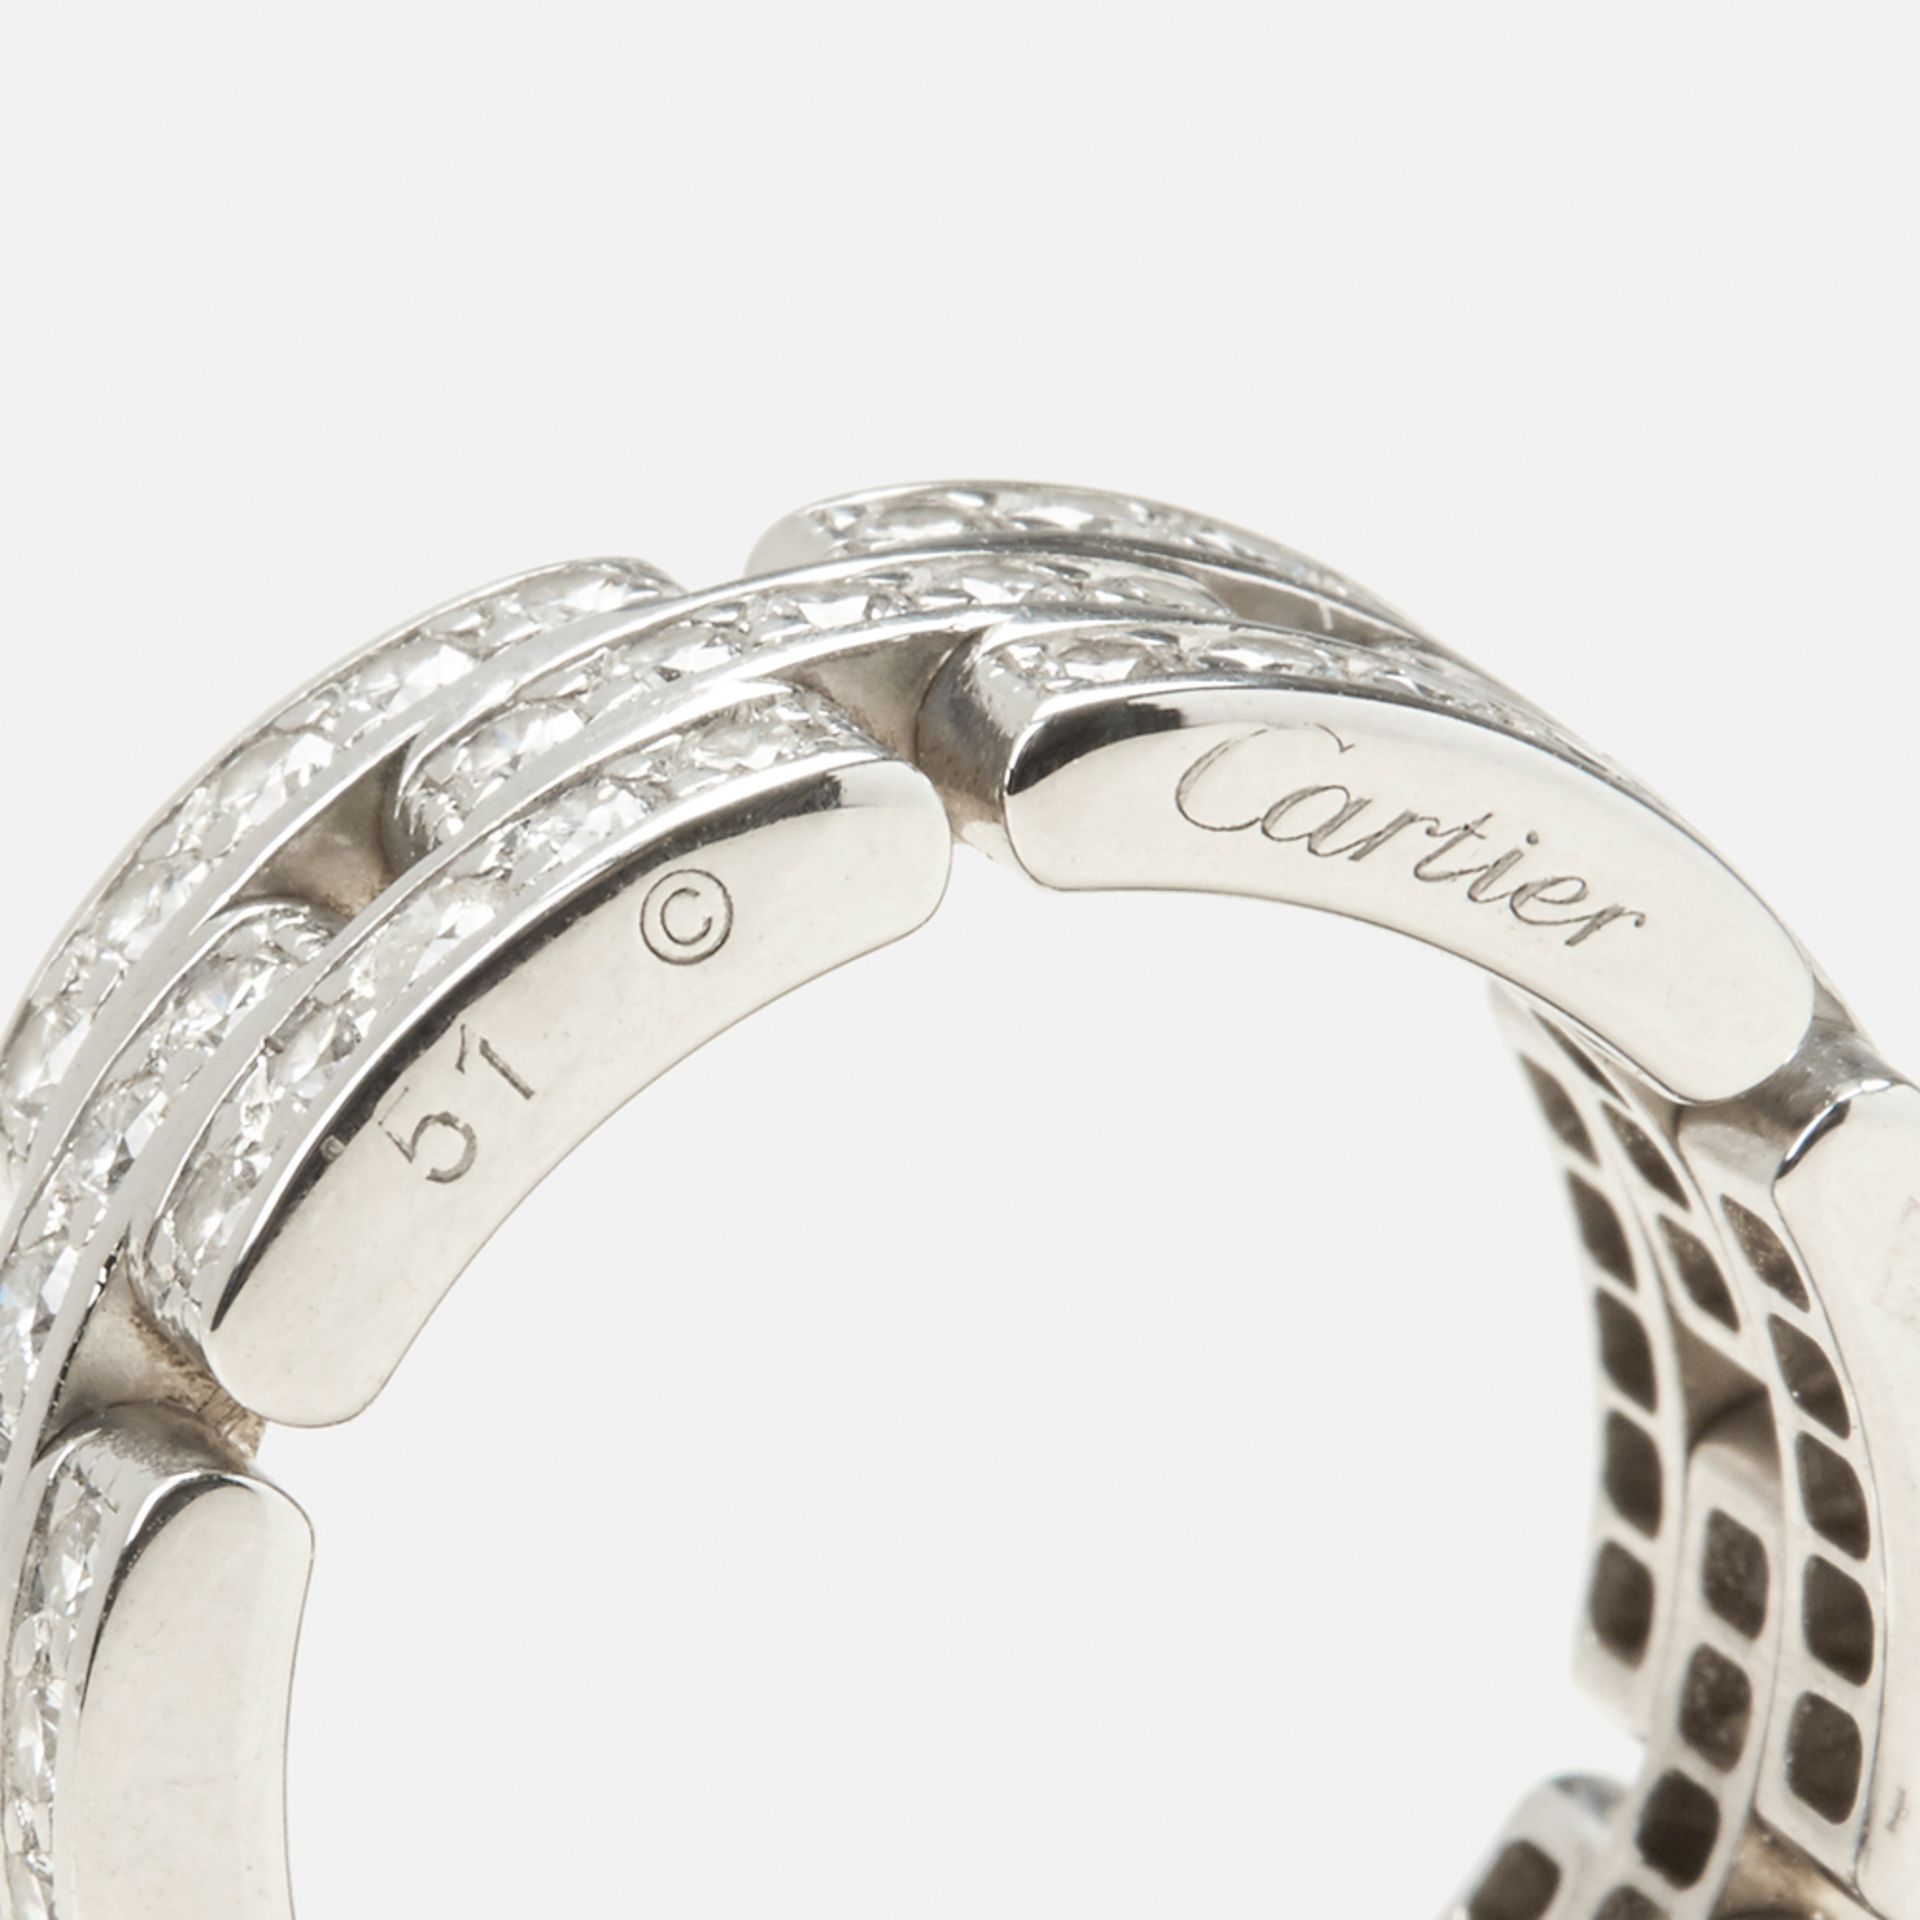 Cartier 18k White Gold Diamond Maillon Ring - Image 7 of 8